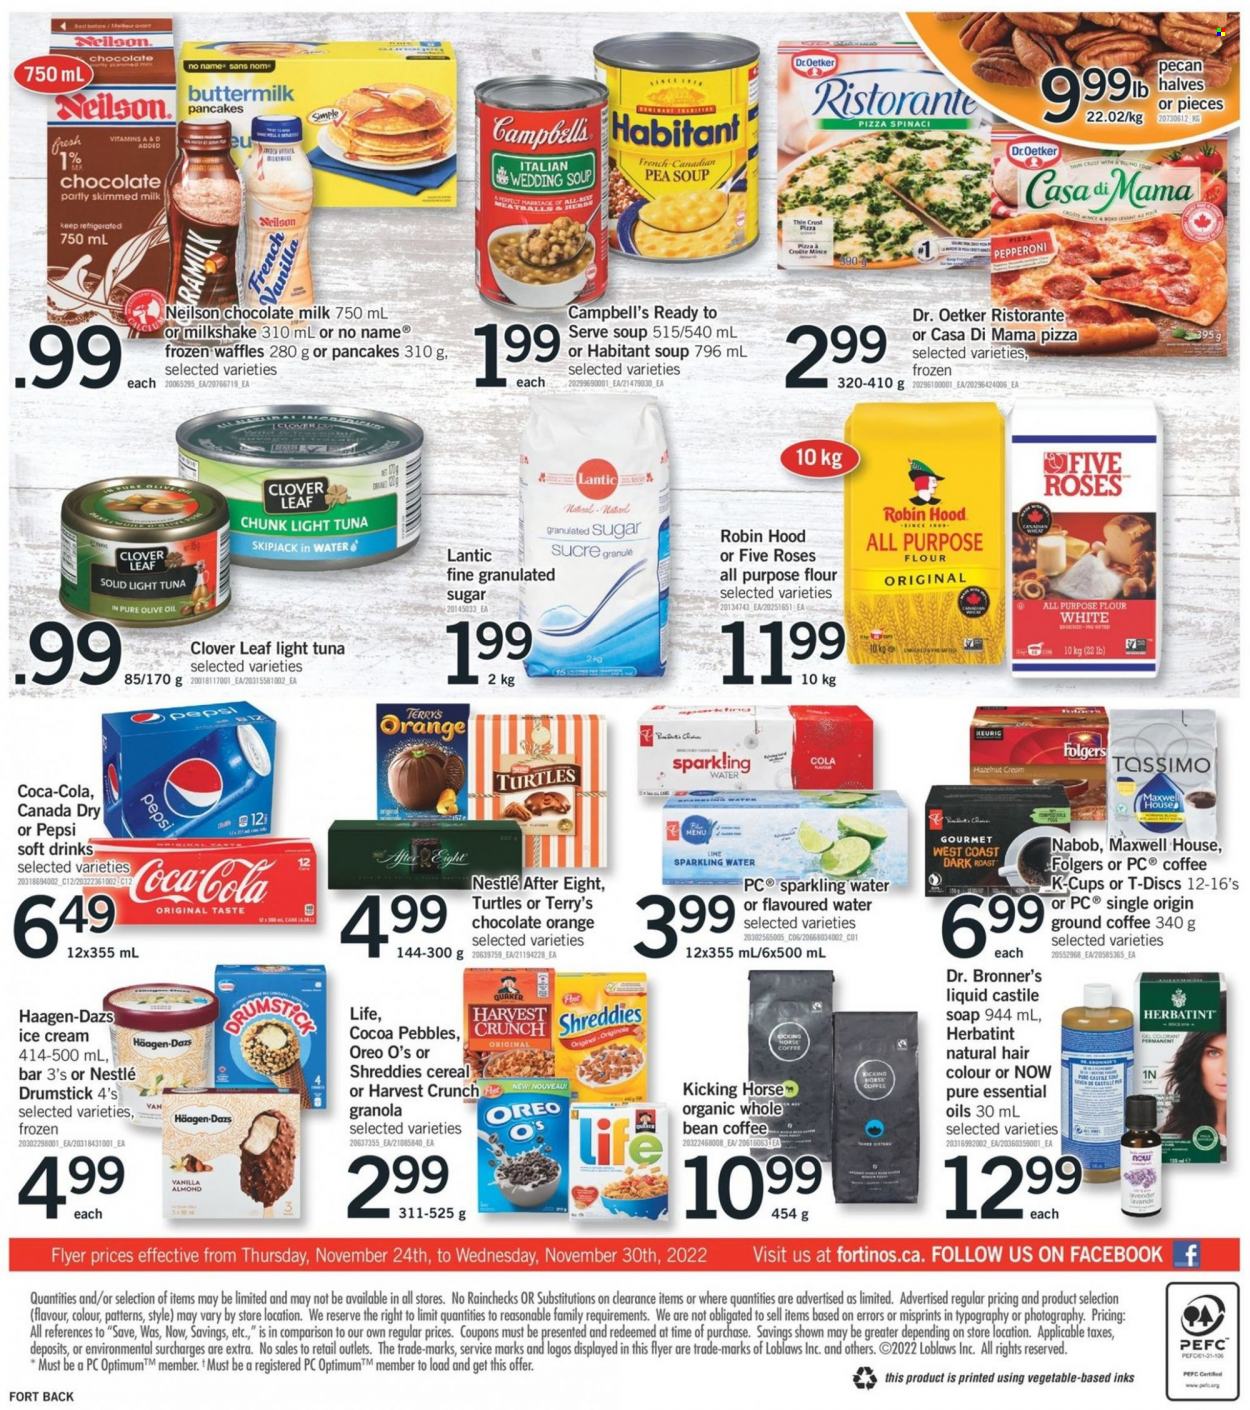 thumbnail - Fortinos Flyer - November 24, 2022 - November 30, 2022 - Sales products - waffles, tuna, No Name, Campbell's, pizza, soup, pepperoni, Dr. Oetker, Clover, buttermilk, milkshake, ice cream, Häagen-Dazs, milk chocolate, After Eight, all purpose flour, flour, granulated sugar, sugar, light tuna, cereals, olive oil, oil, Canada Dry, Coca-Cola, Pepsi, soft drink, sparkling water, Maxwell House, Folgers, ground coffee, coffee capsules, K-Cups, Keurig, soap, hair color, essential oils, turtles, Optimum, granola, Nestlé, Oreo. Page 2.